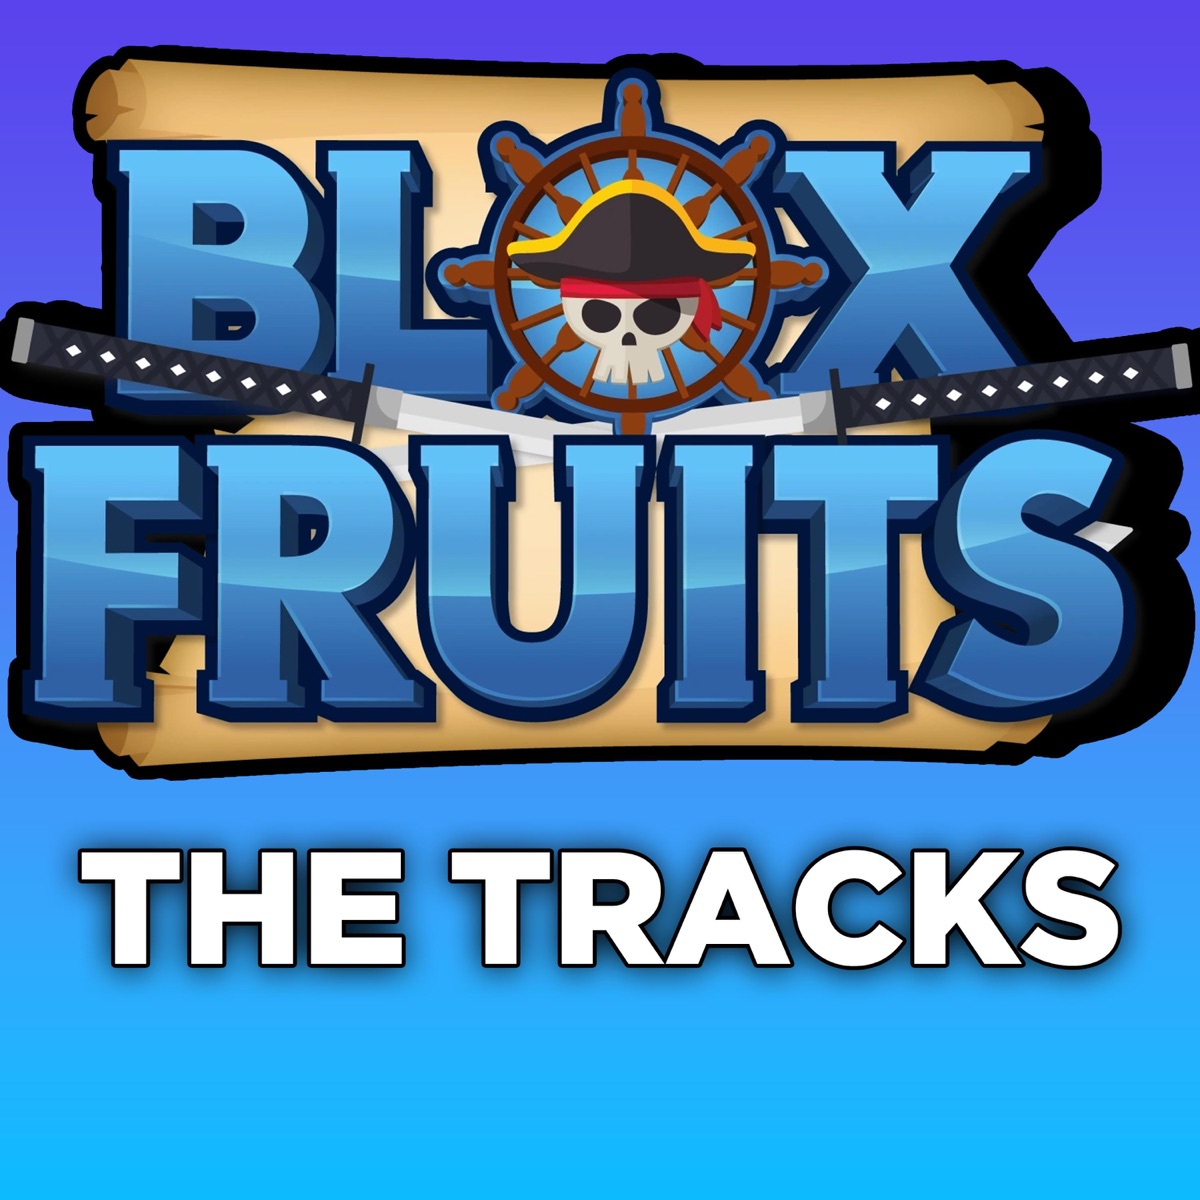 Blox Fruits: The Tracks - EP - Album by TanookiAlex - Apple Music